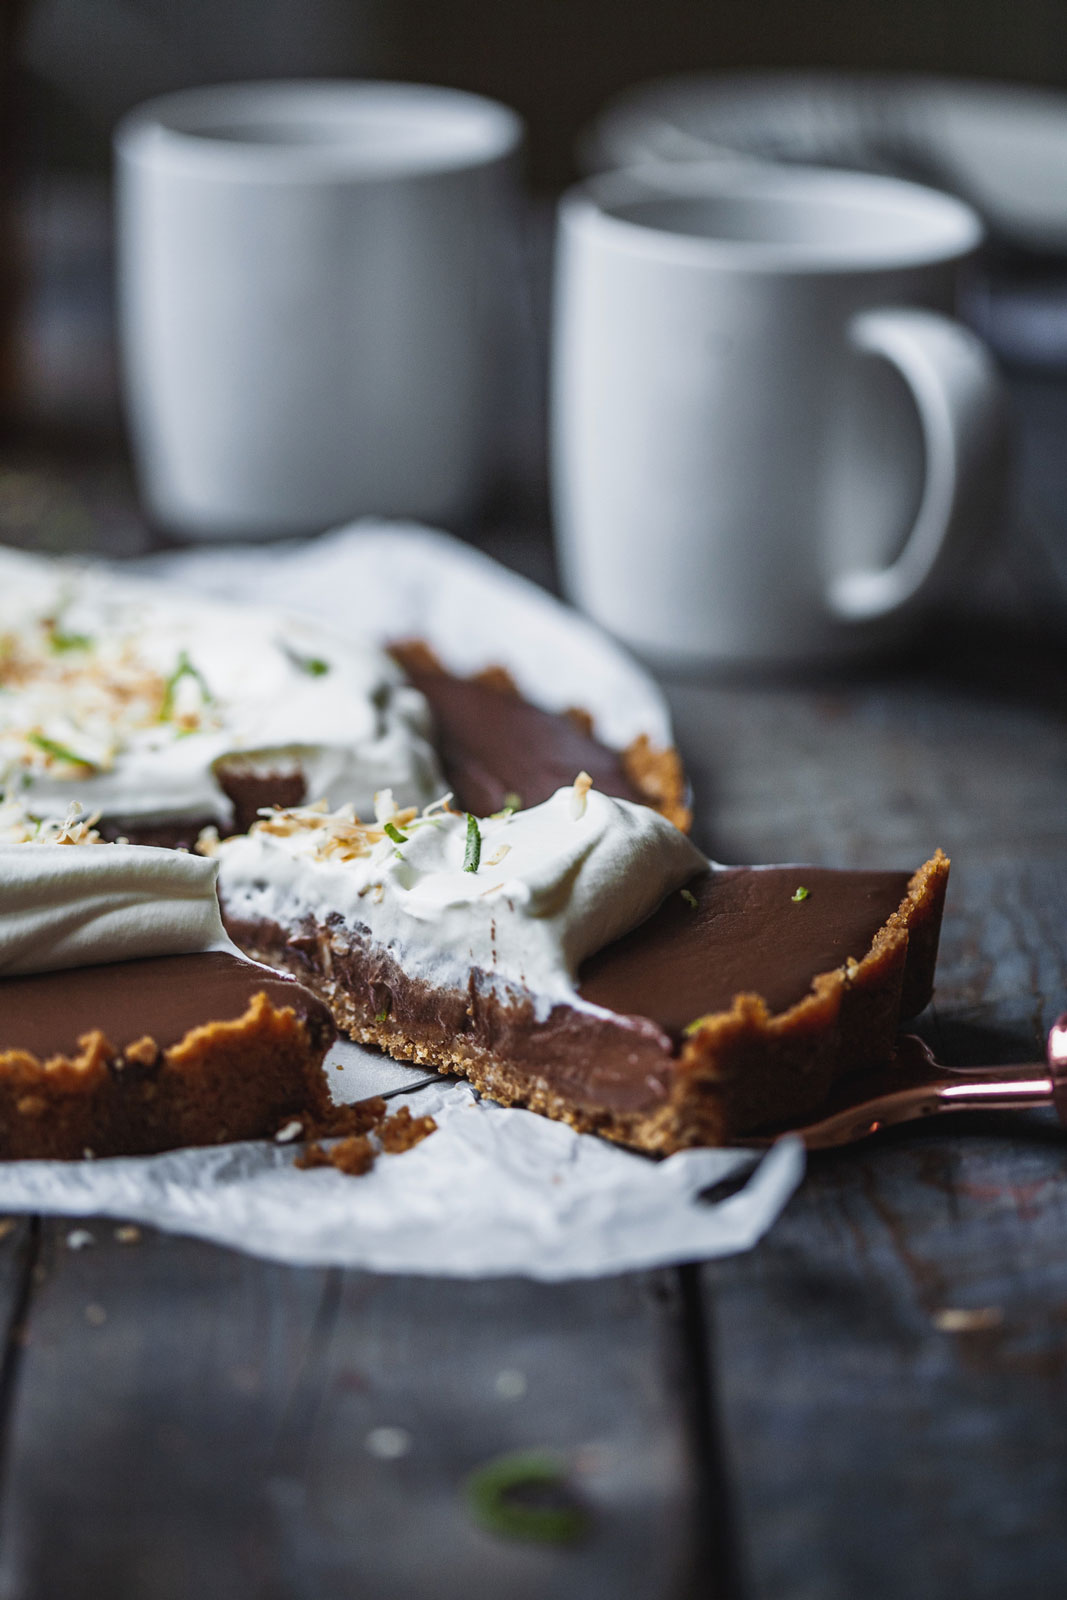 Chocolate Lime Tart With A Ginger Snap Crust